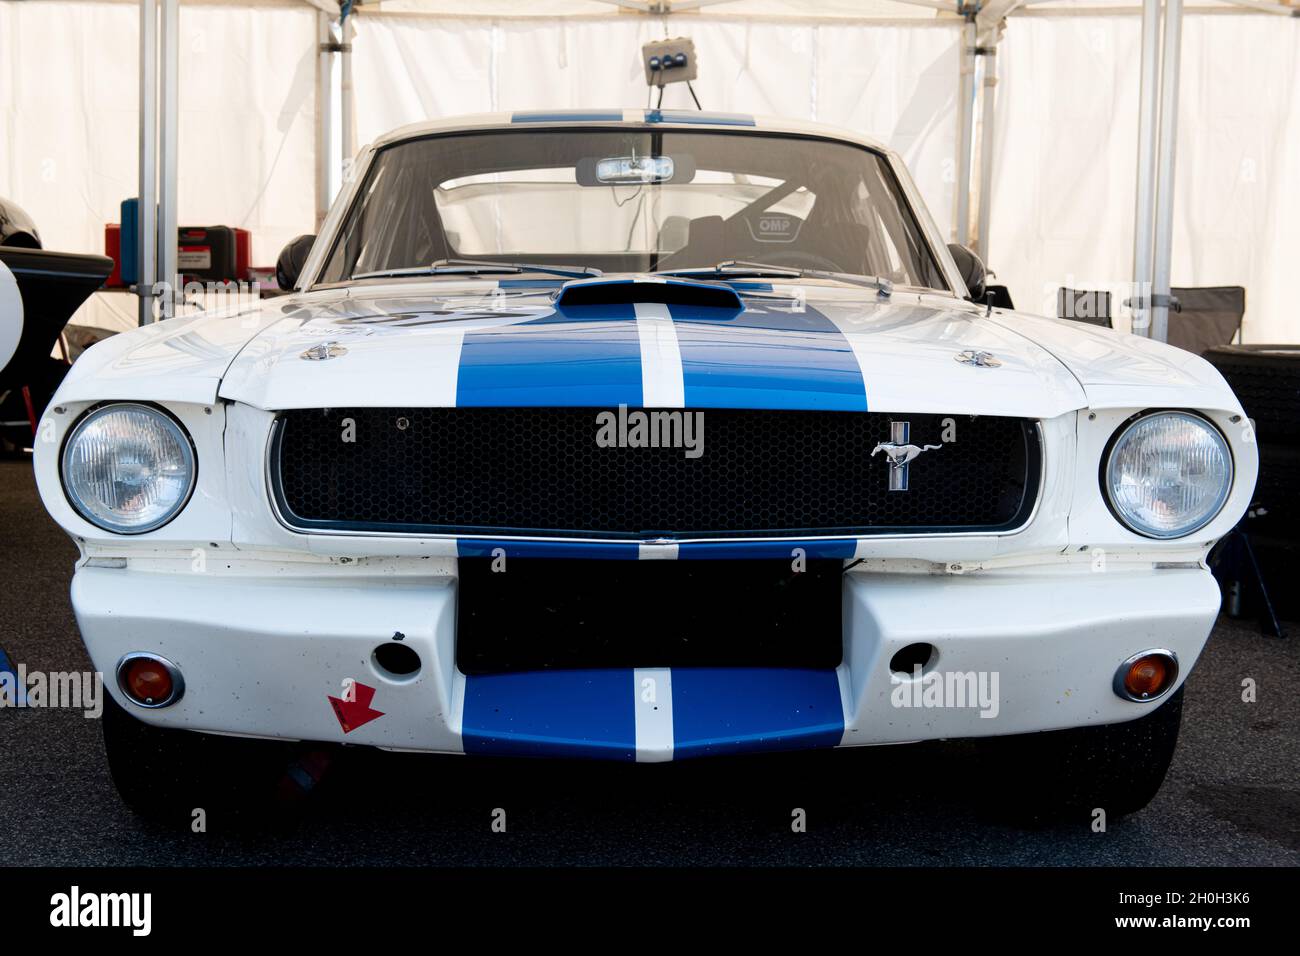 Italy, september 11 2021. Vallelunga classic. Legend classic car motorsport of sixties Shelby Mustang front view Stock Photo